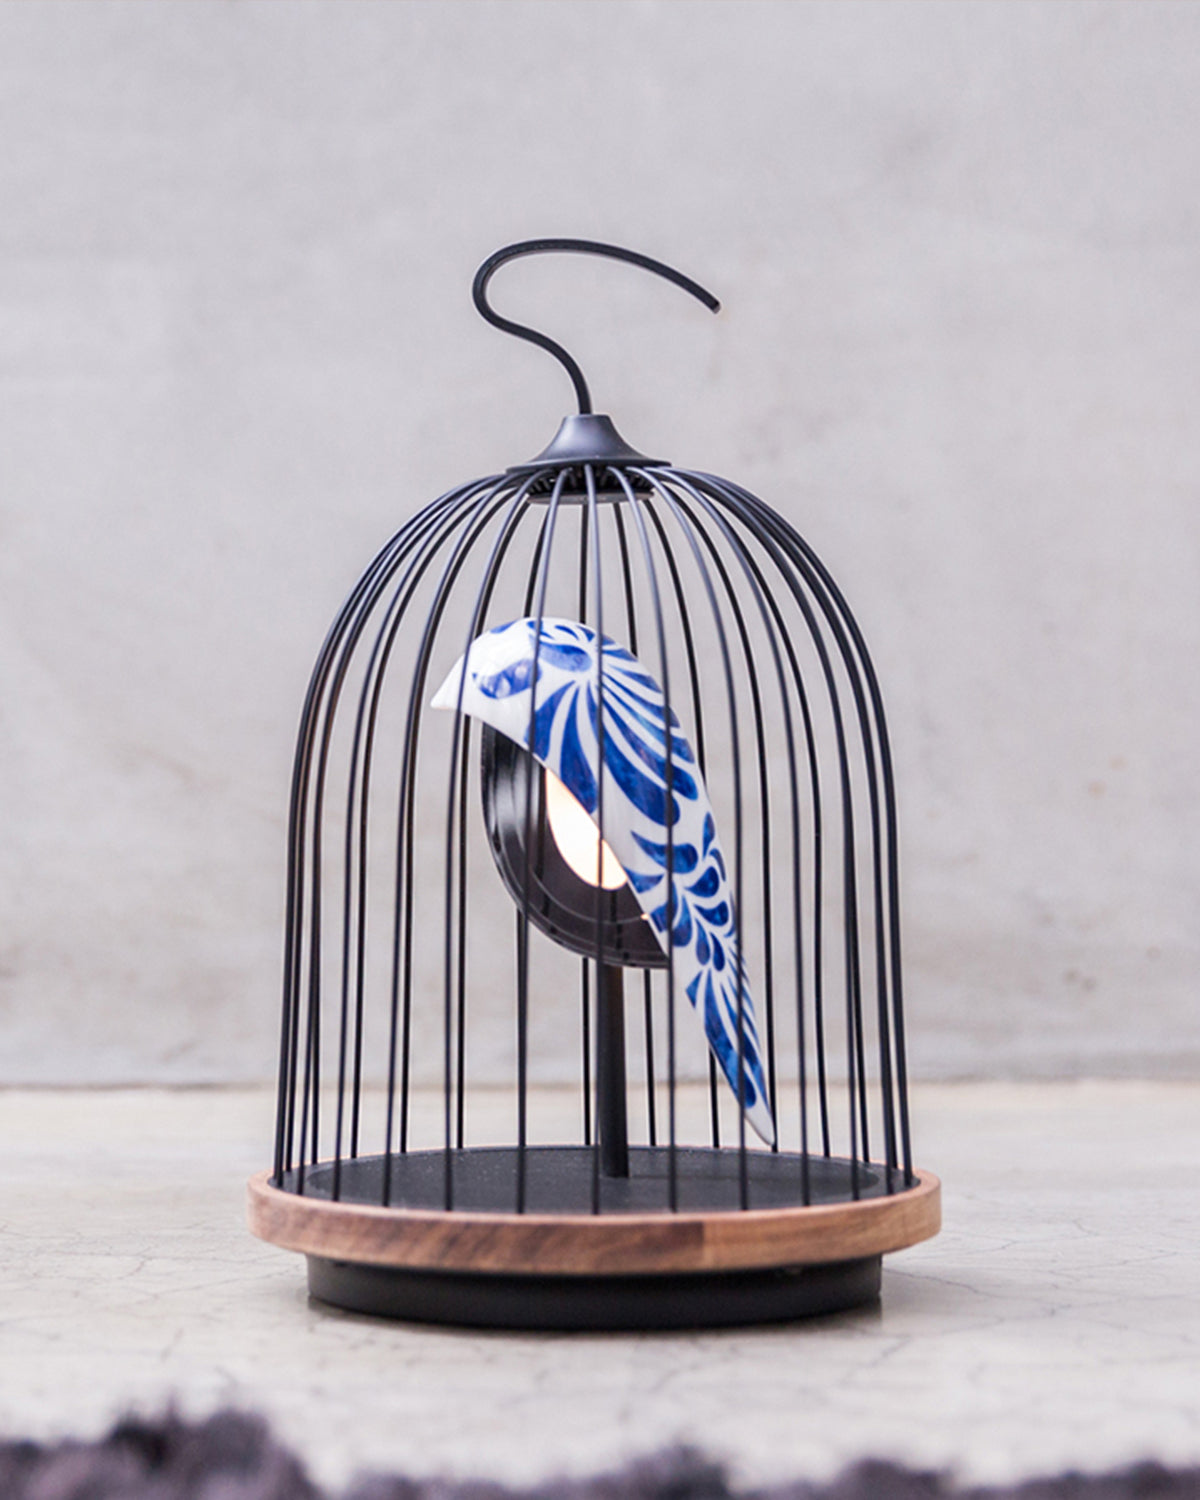 Daqi Bluetooth Speaker and Light white porcelain bird with navy Daqi Blue feather pattern gold accents black cage and walnut color speaker base